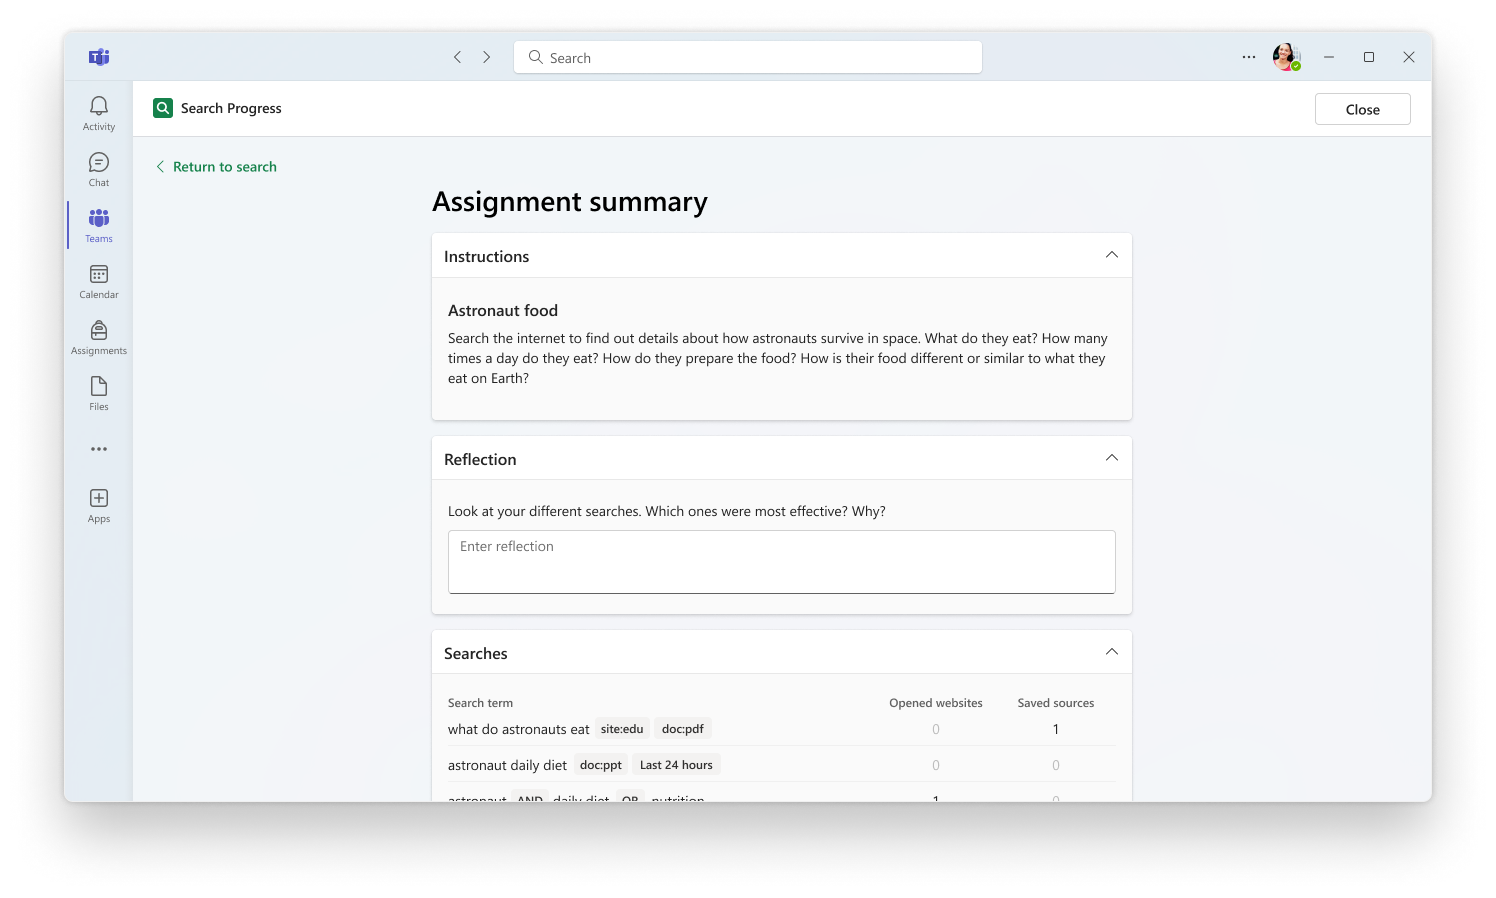 Student interface for an assignment summary in Search Progress.